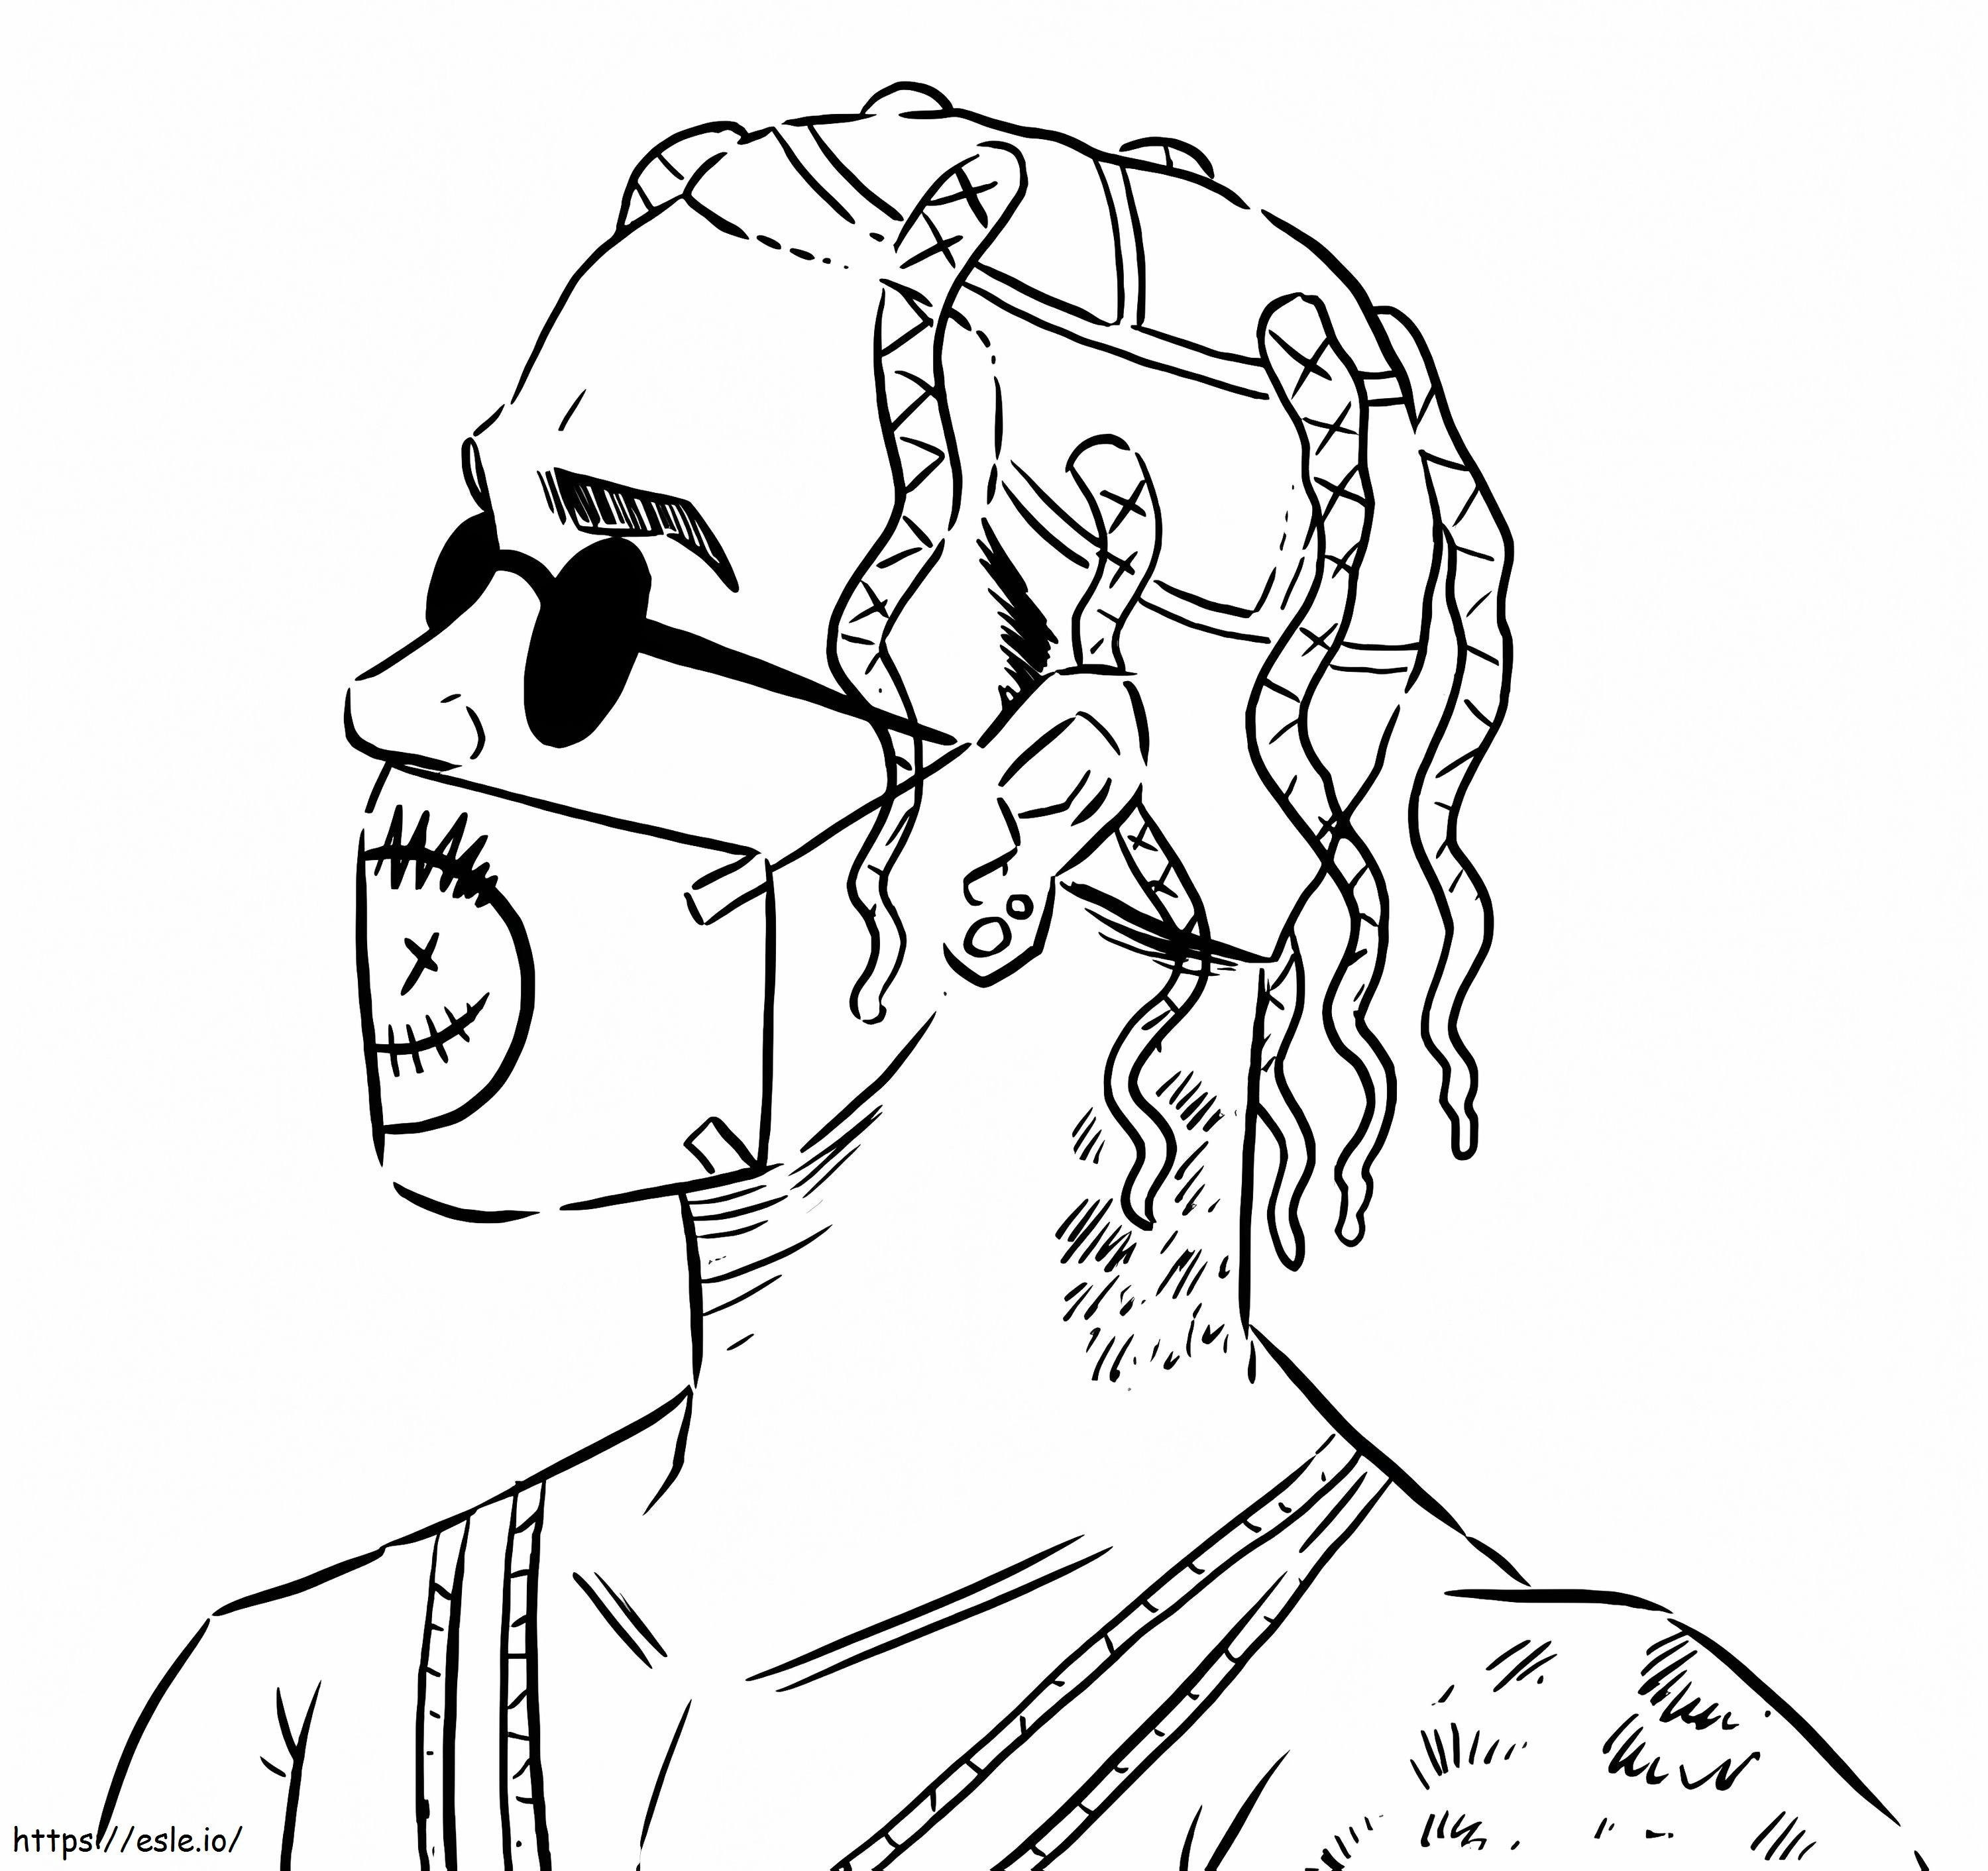 Travis Scott Wearing A Mask coloring page